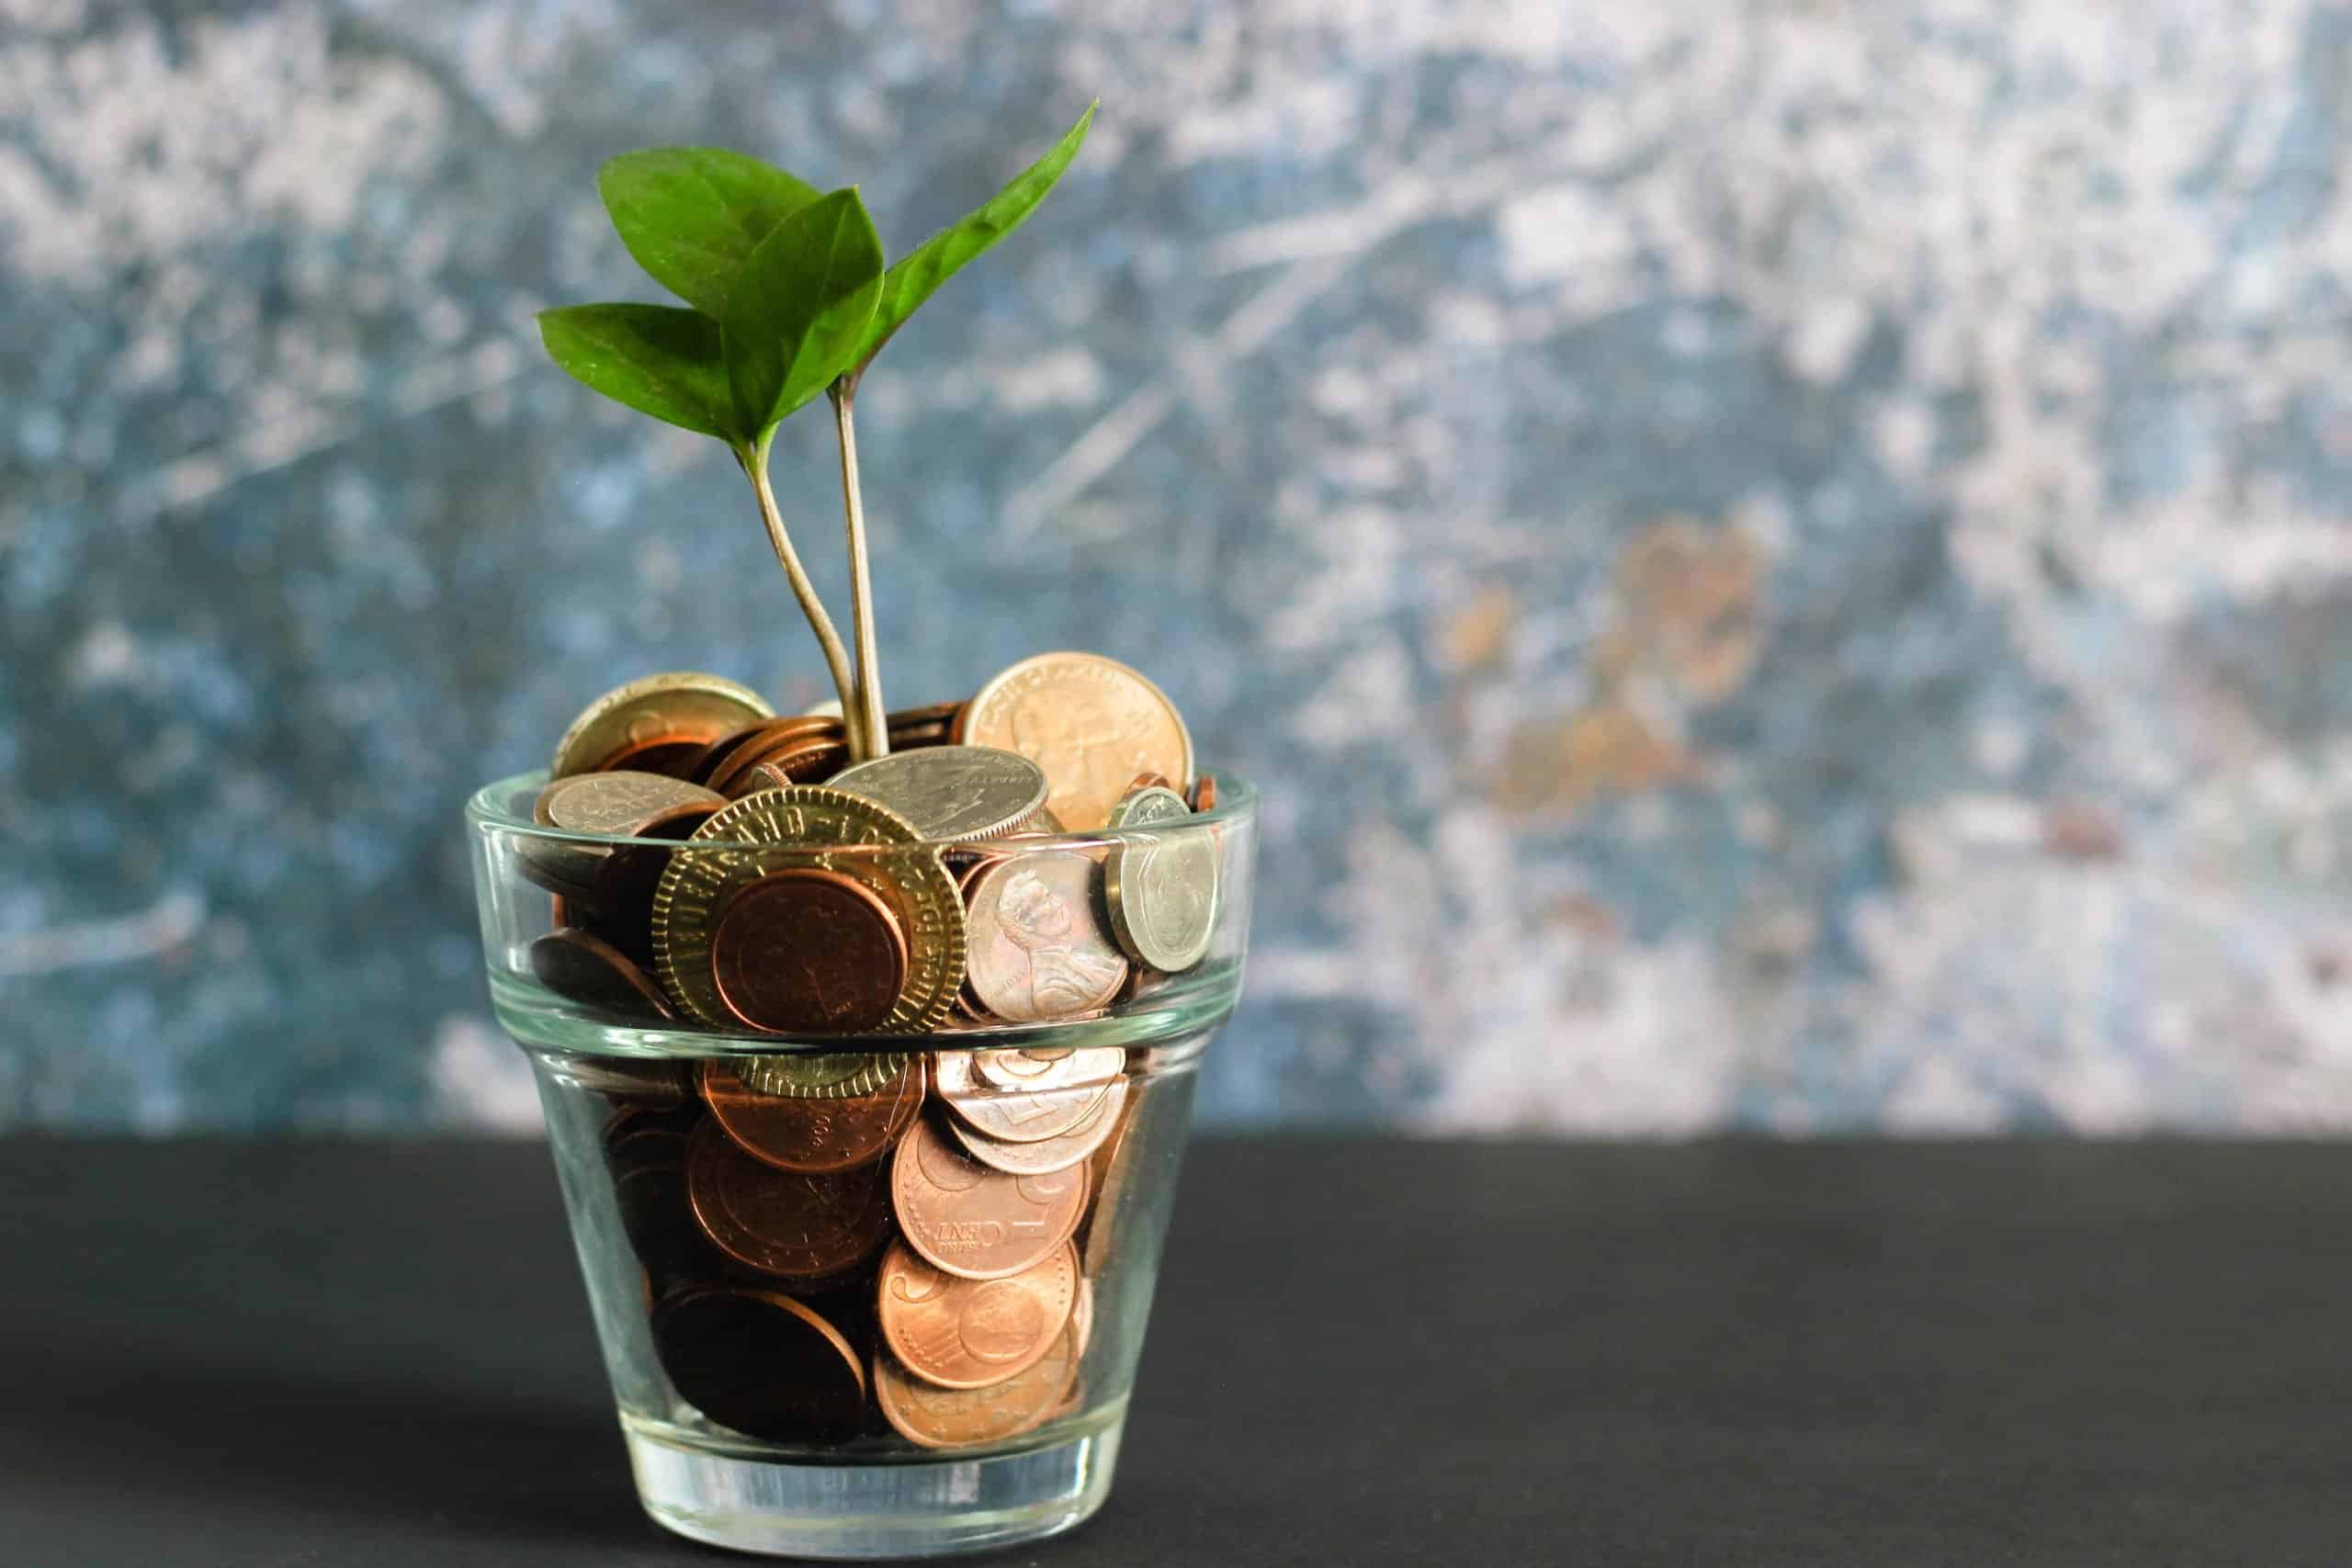 A glass with coins and a plant growing to represent polygon founder's web3 fund